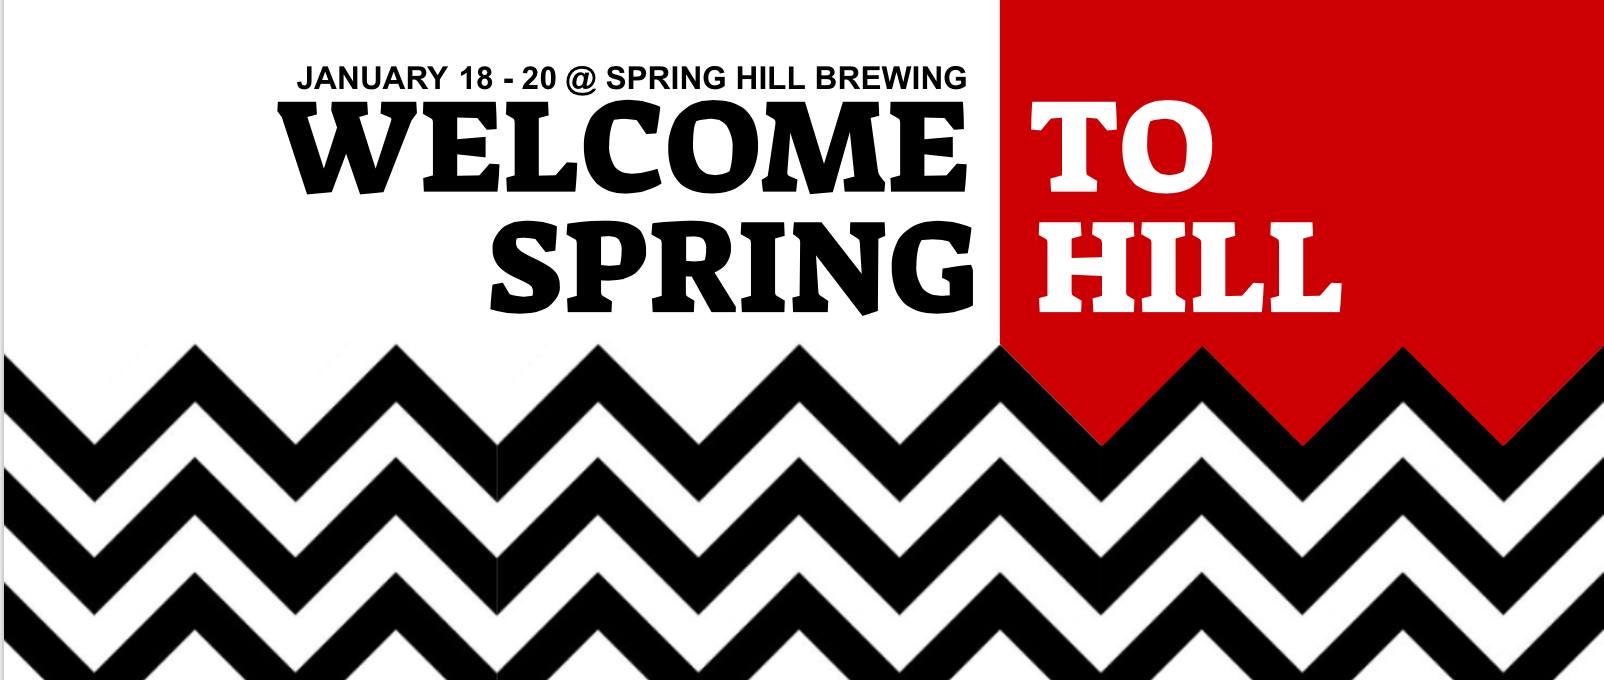 Twin Peaks Weekend at Spring Hill Brewing